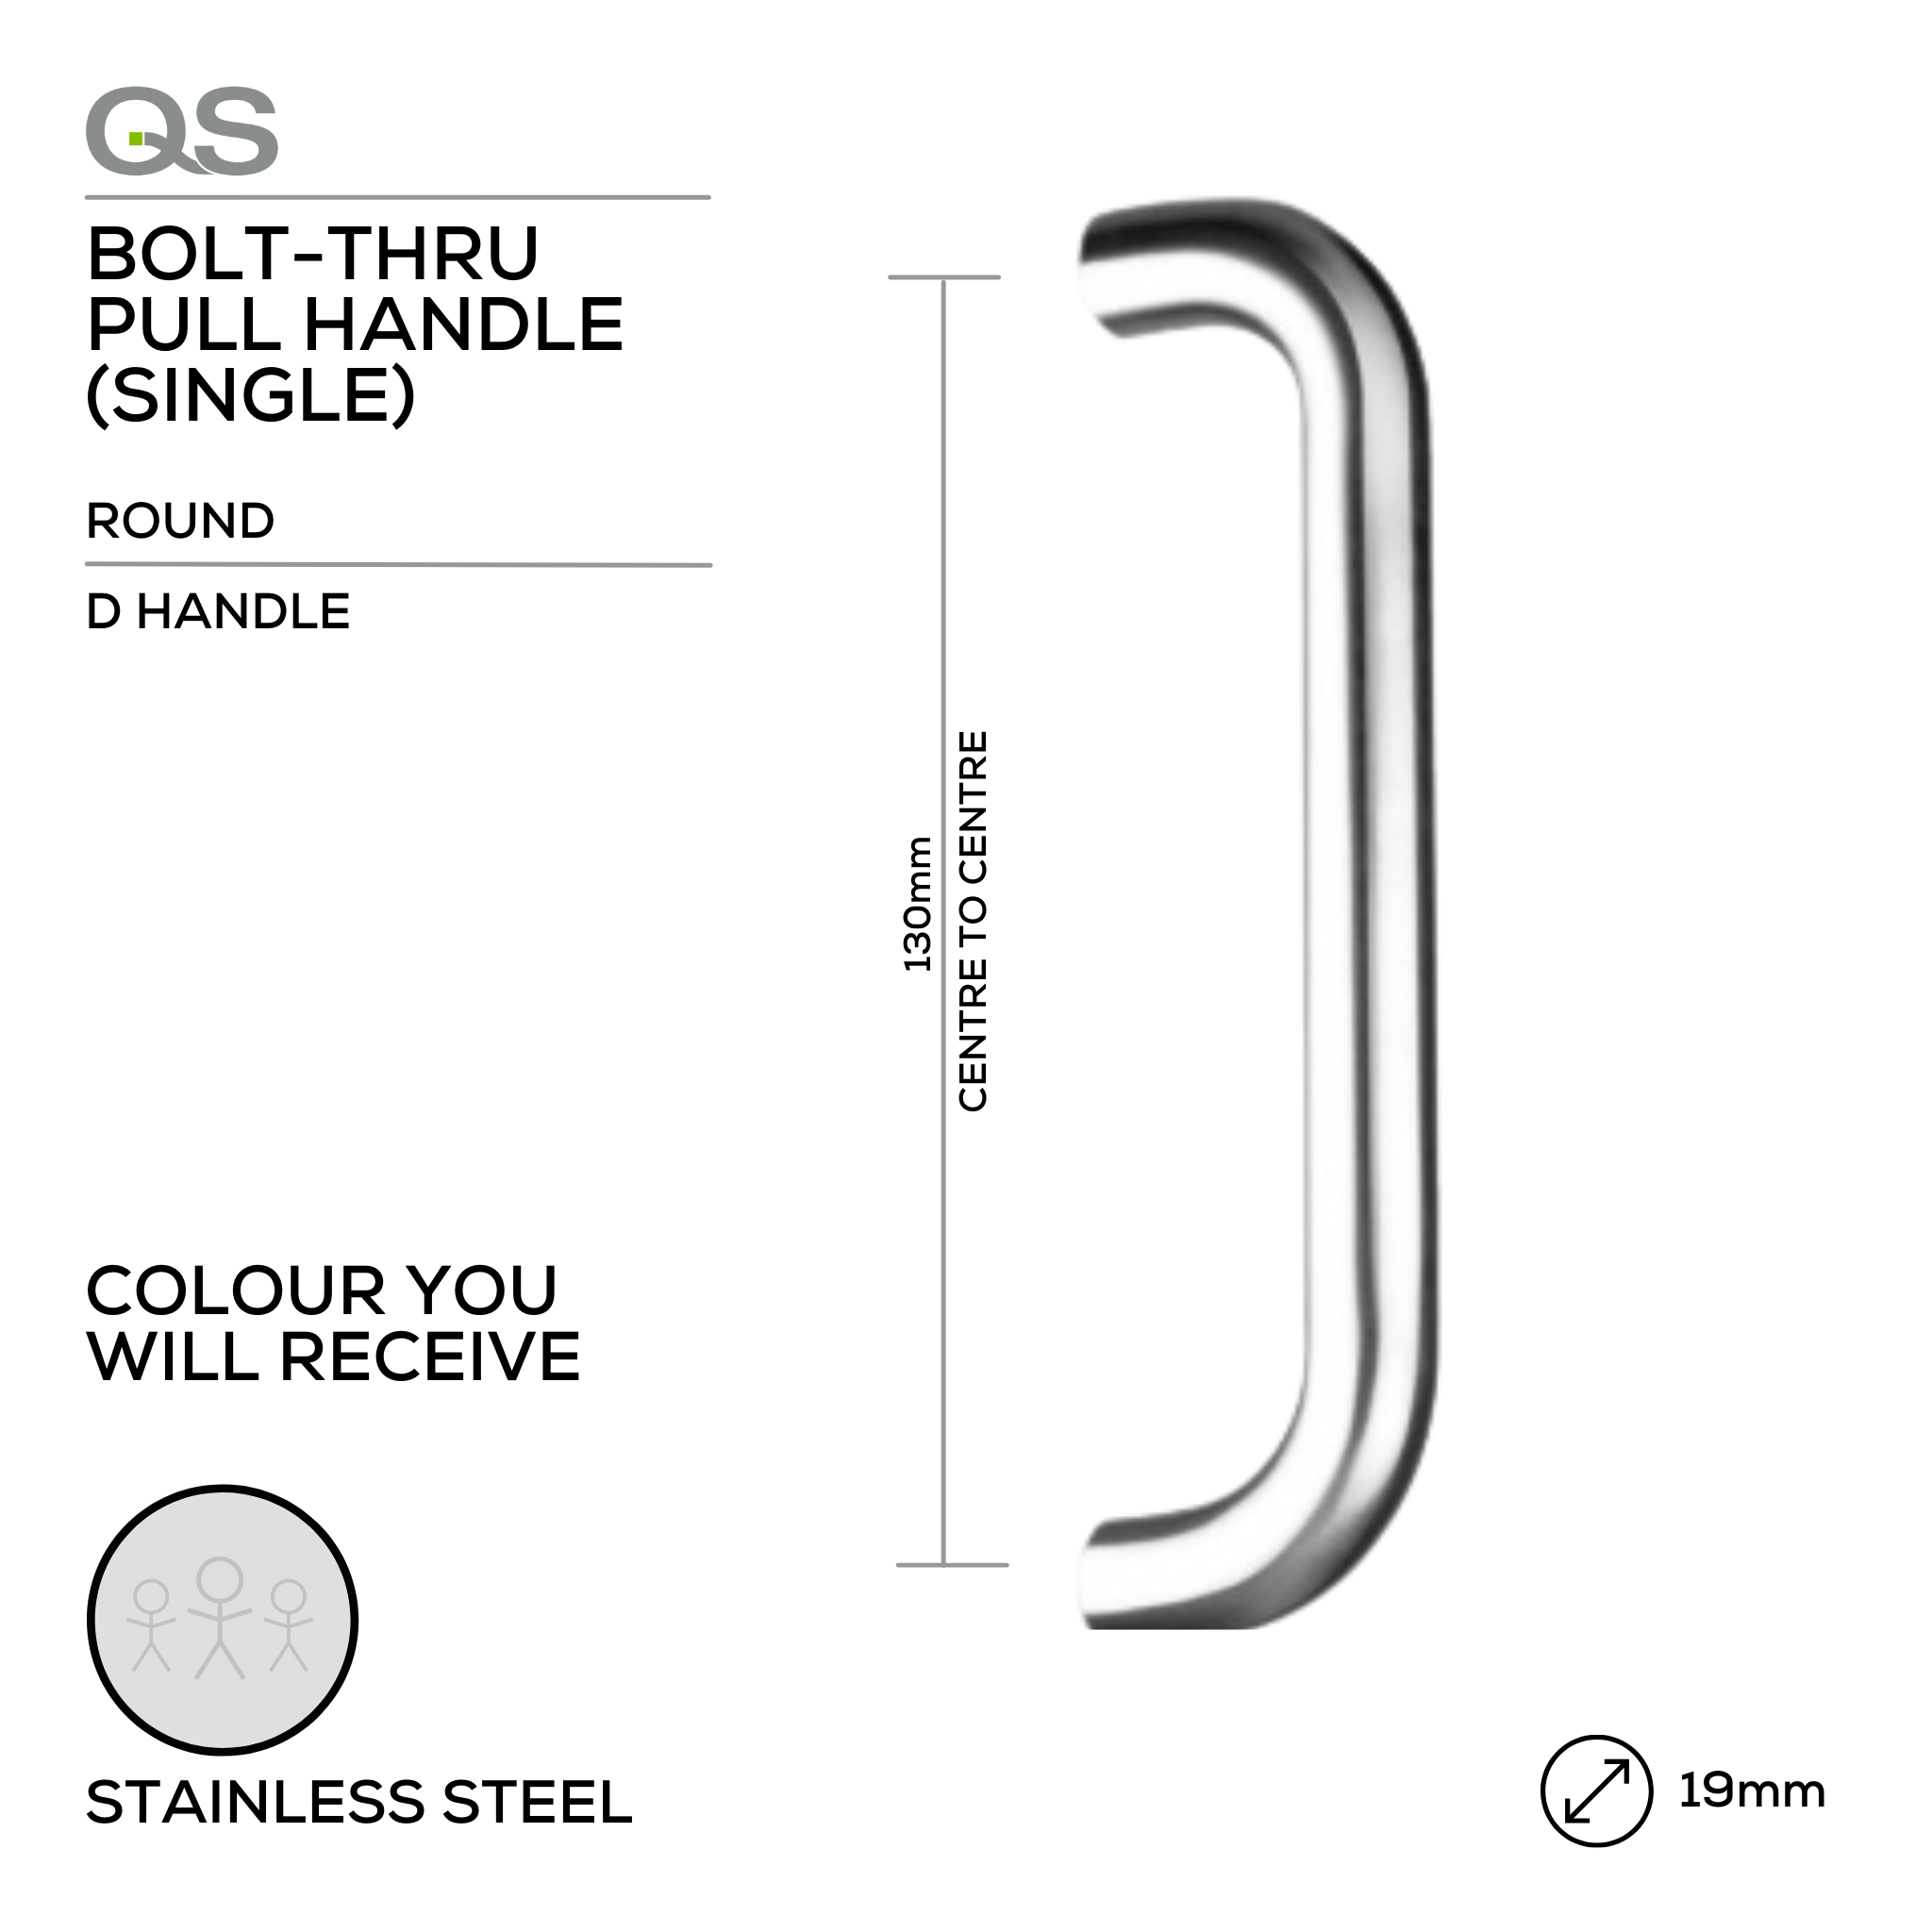 QS2203/1 D Handle, Pull Handle, Round, D Handle, BoltThru, 19mm (Ø) x 130mm (ctc), Stainless Steel, QS